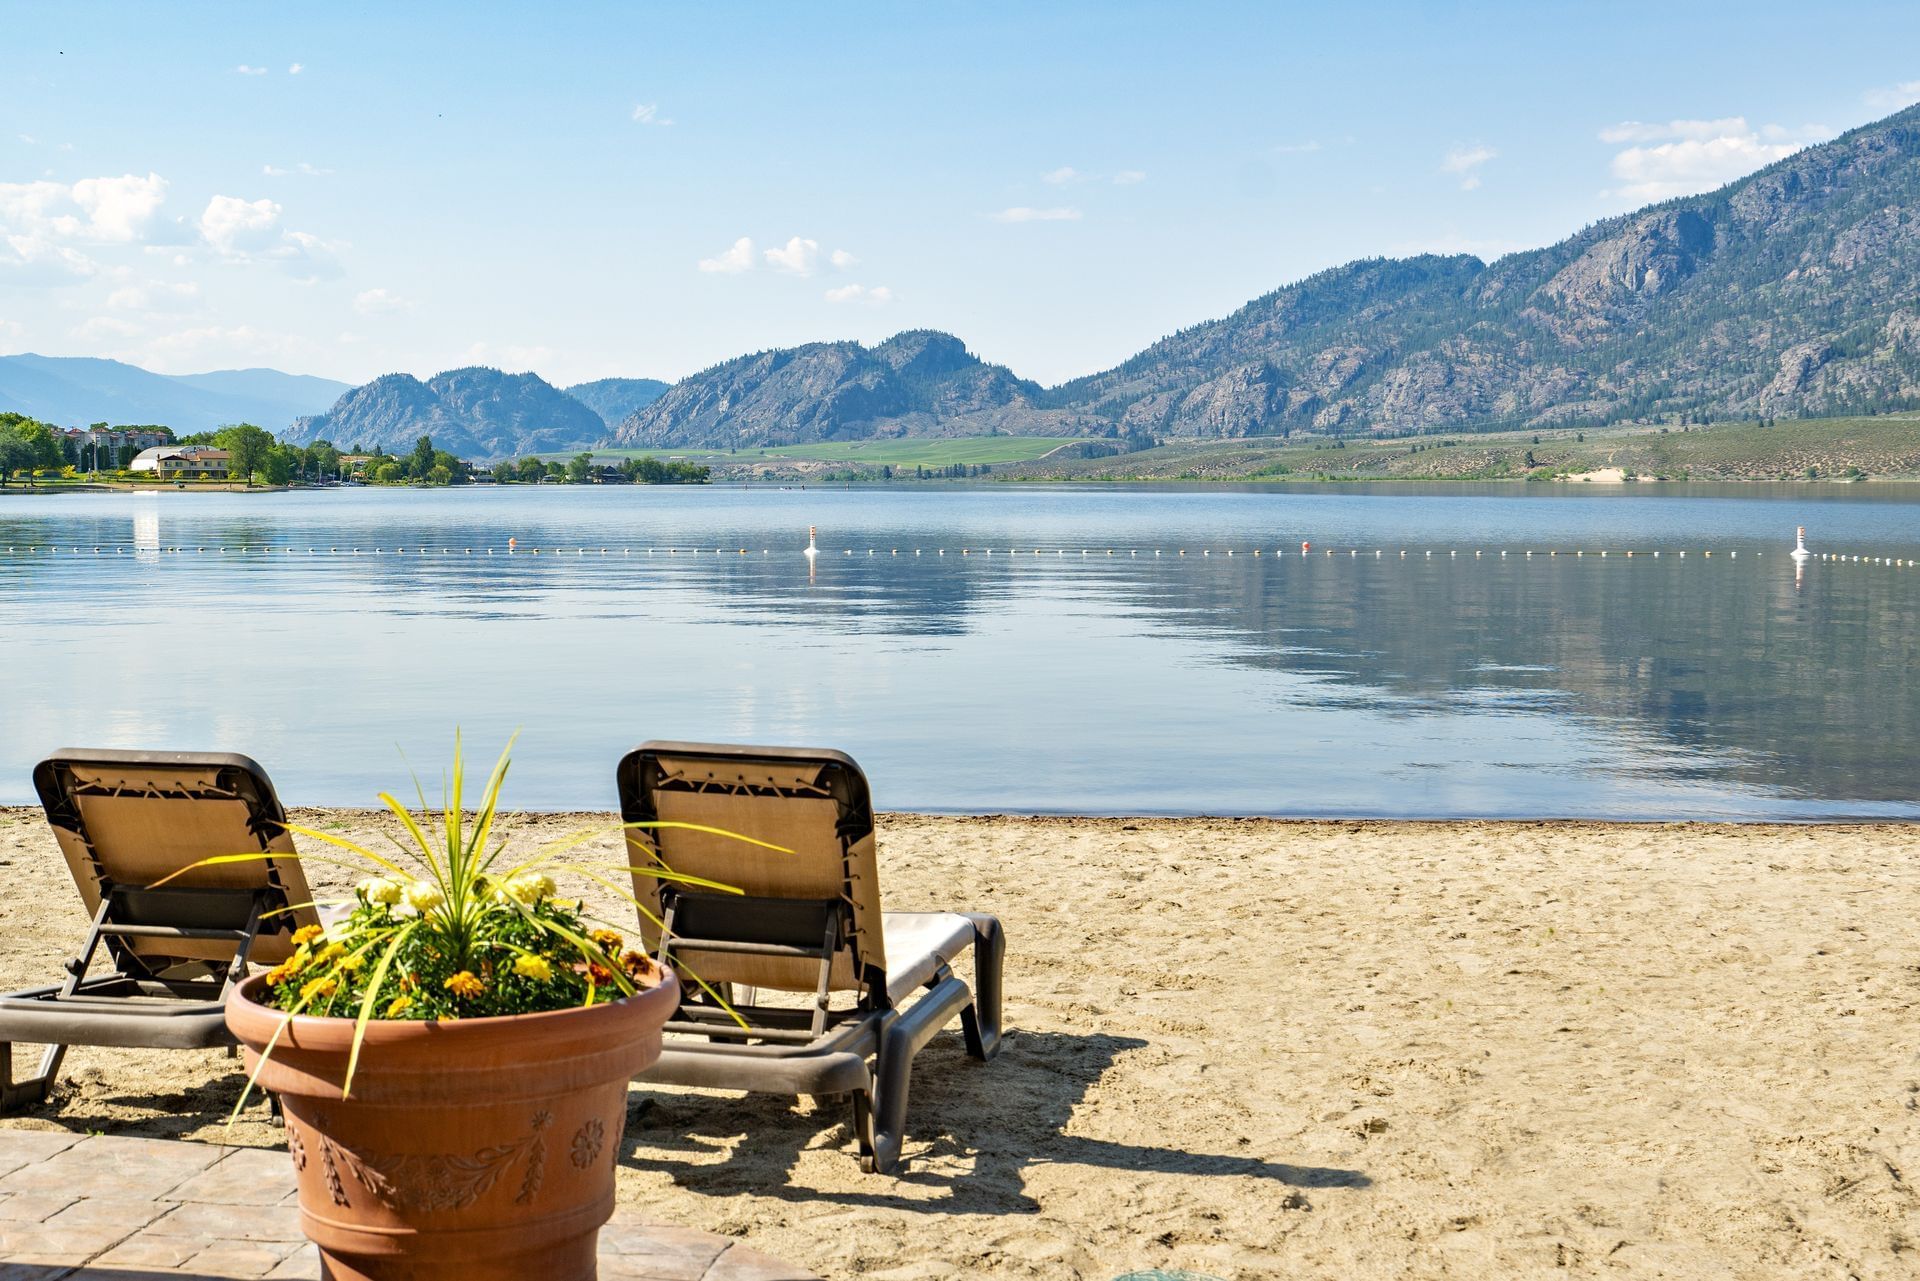 Two beach chairs on sand overlooking lake with mountains in back